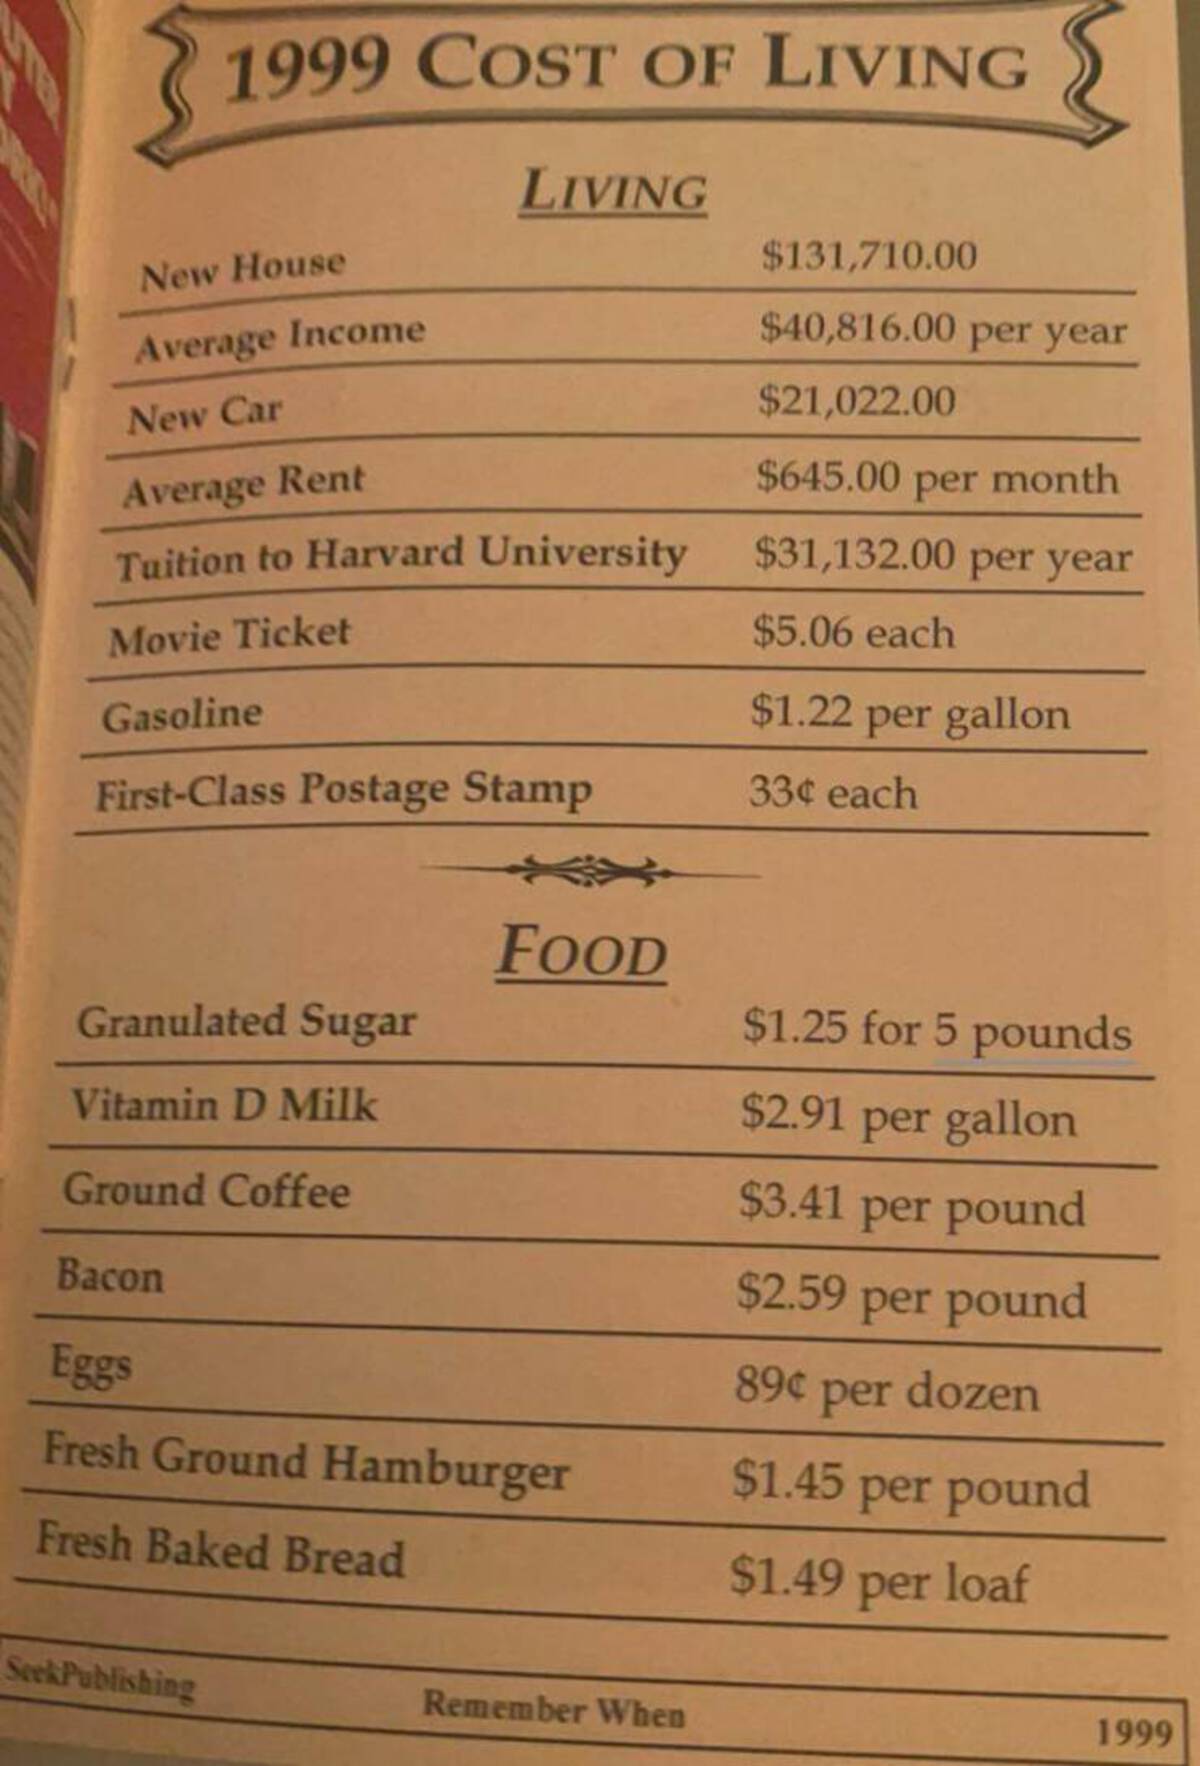 cost of living 1955 uk - 1999 Cost Of Living New House Average Income New Car Living Average Rent Tuition to Harvard University Movie Ticket Gasoline FirstClass Postage Stamp SeekPublishing Food Granulated Sugar Vitamin D Milk Ground Coffee Bacon Eggs Fre